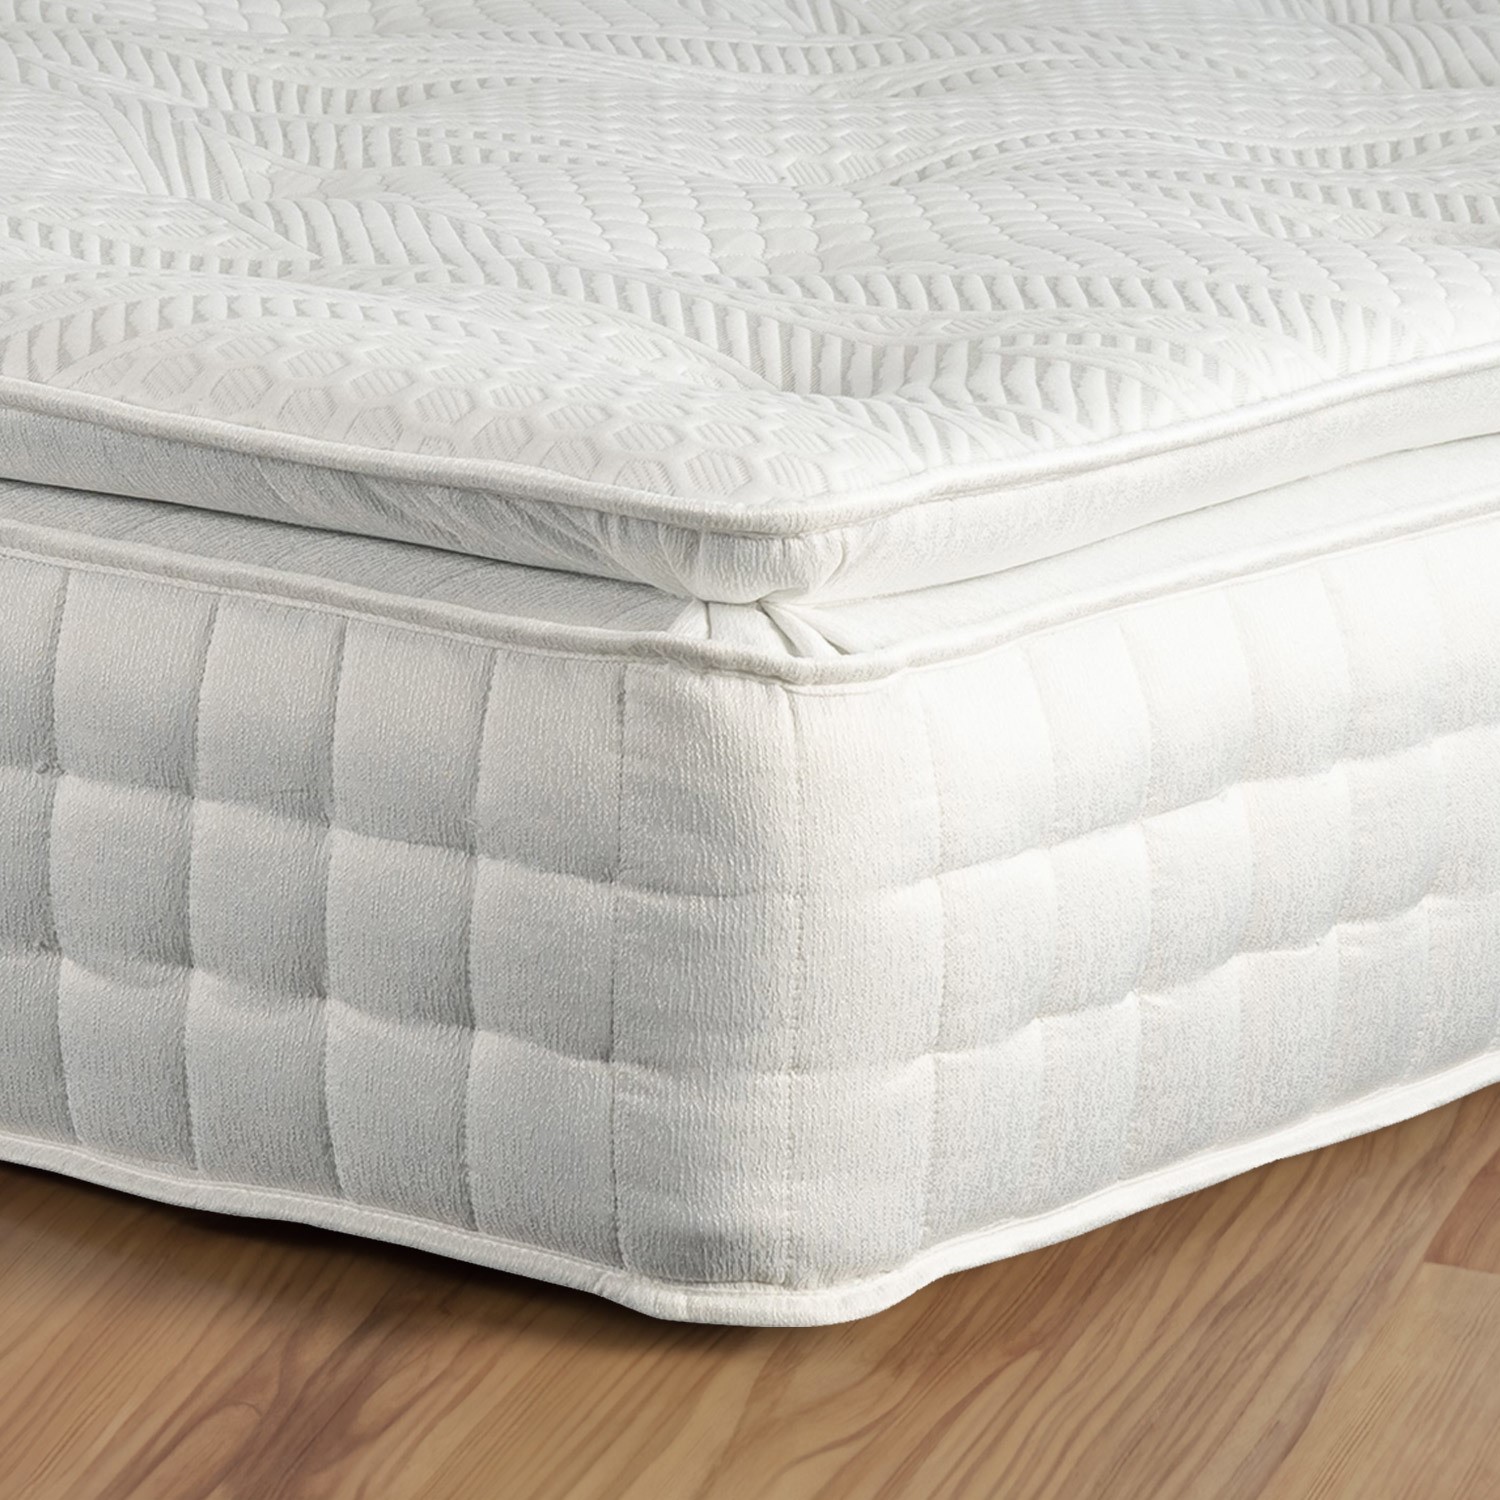 Photo of Small double 2000 pocket sprung pillowtop mattress with memory foam top - sleepful